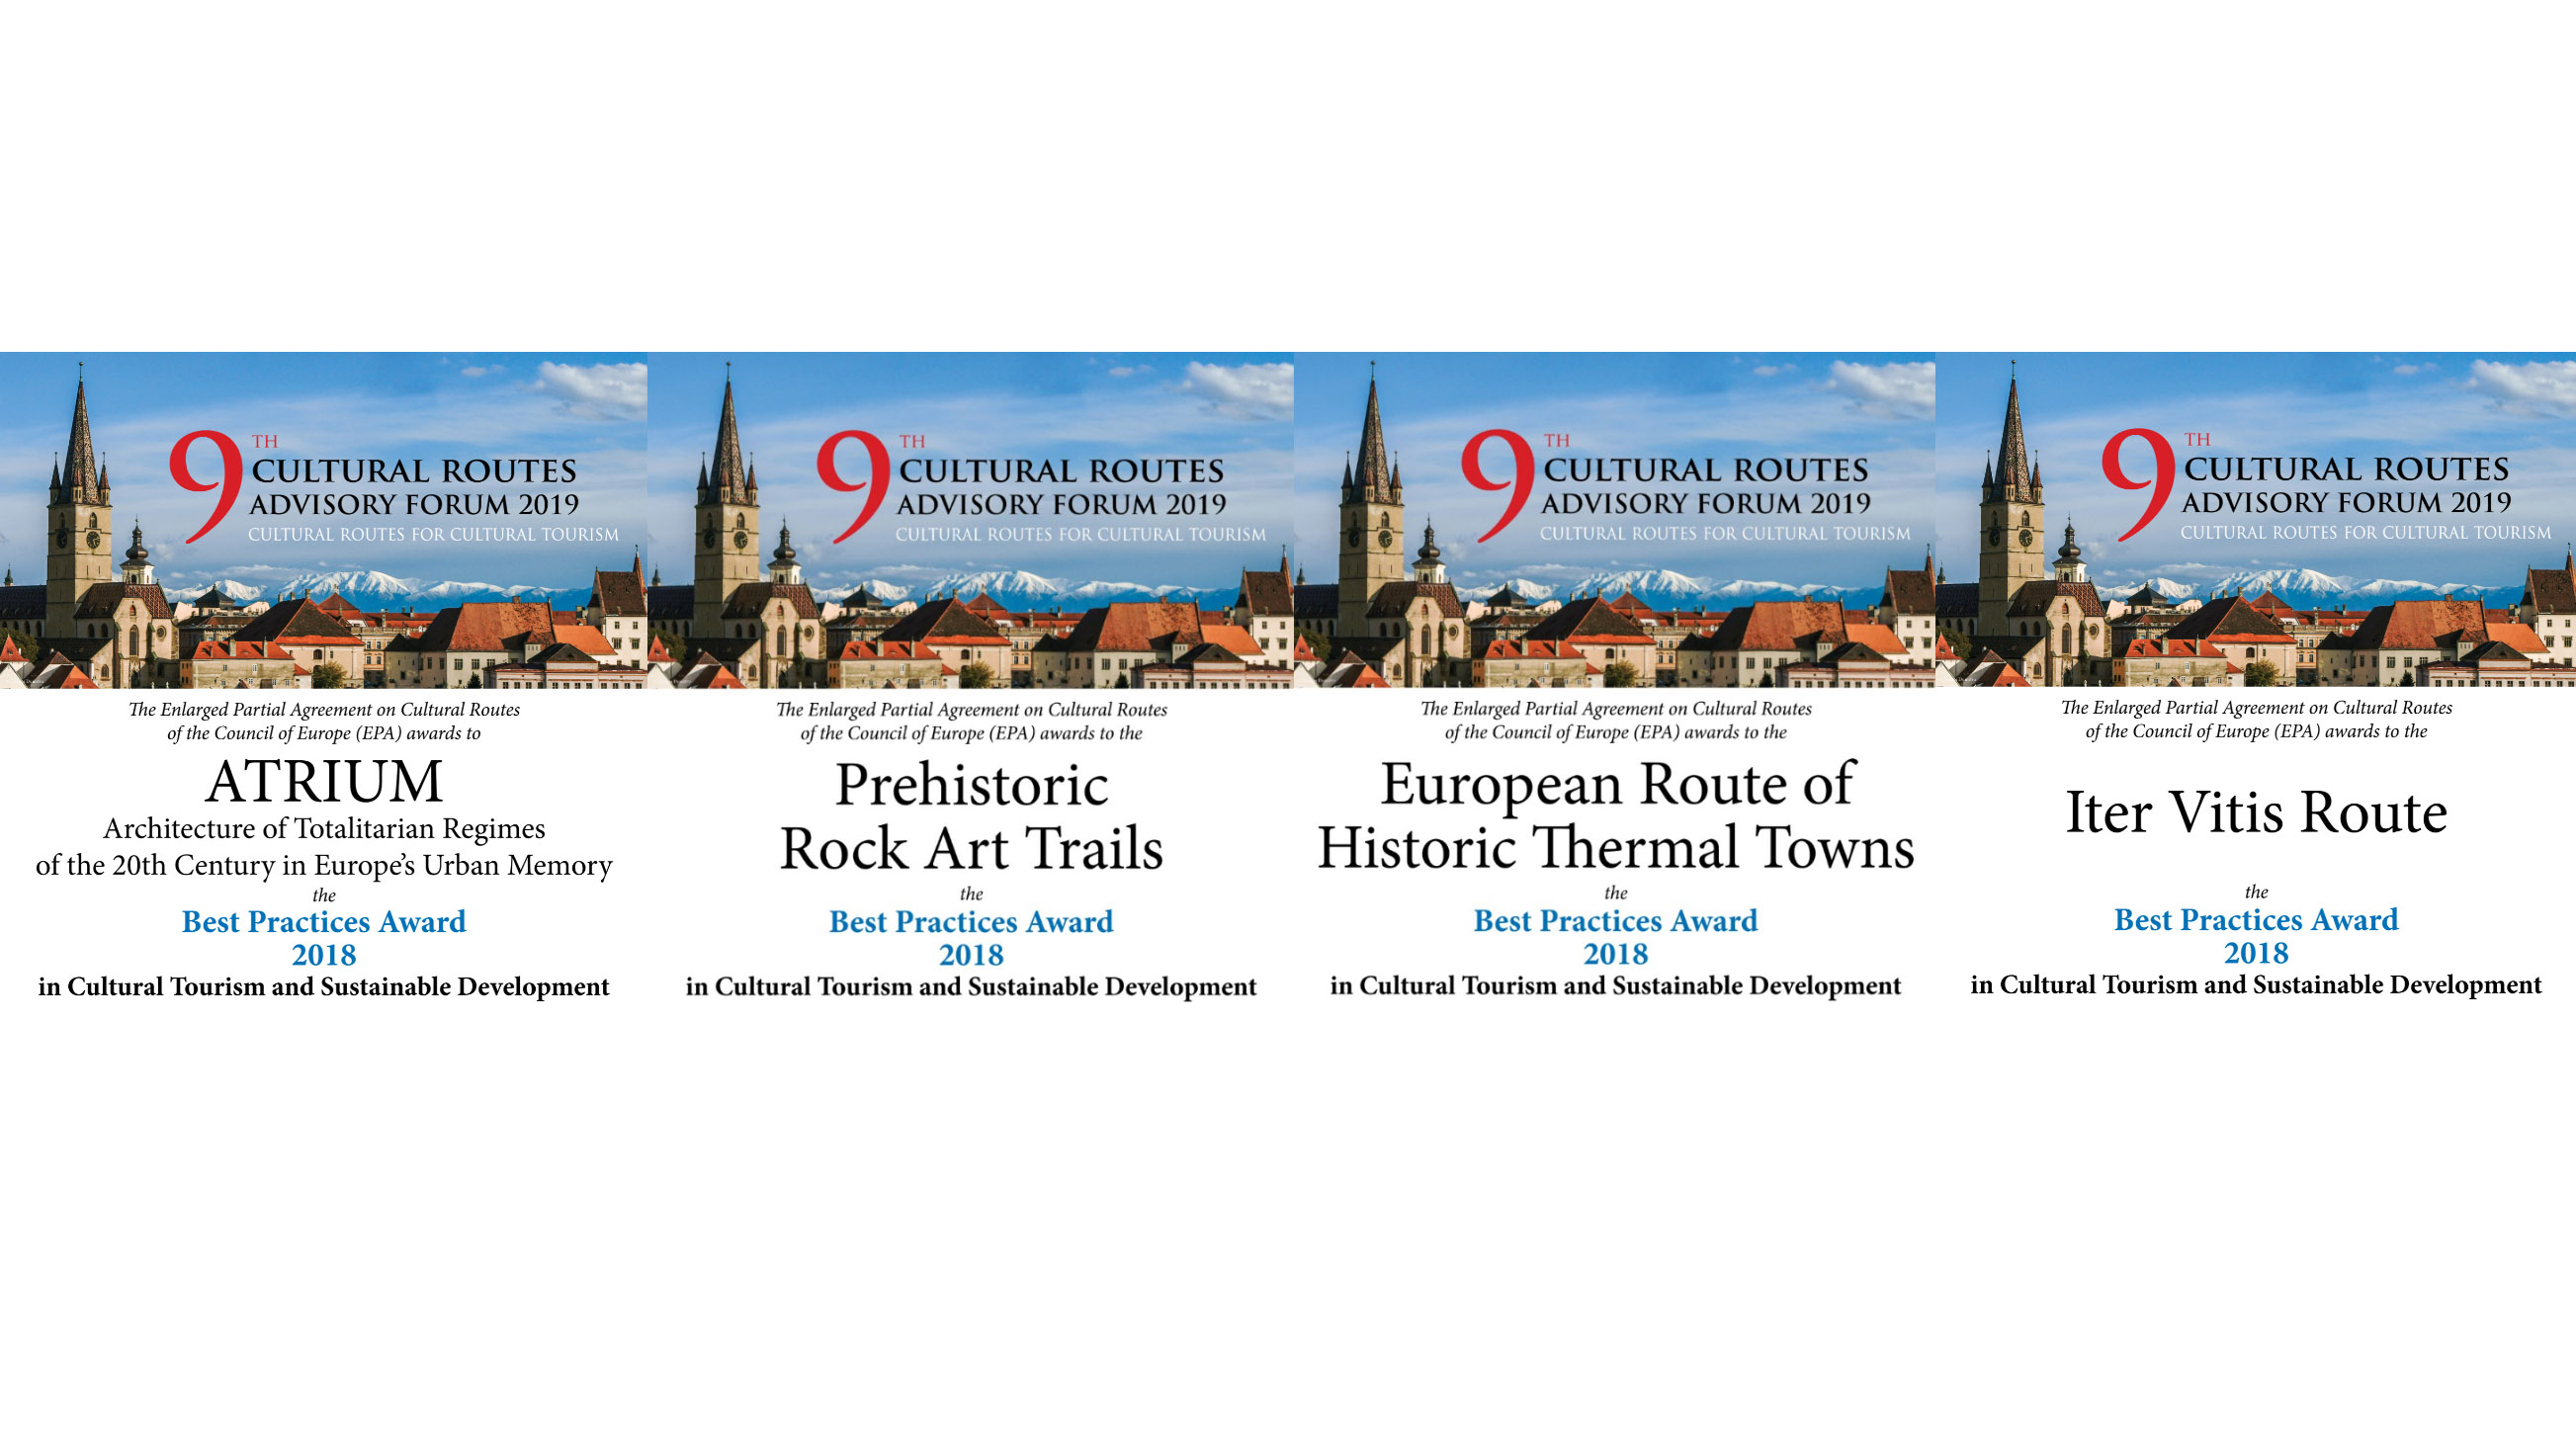 2018 Awards for Cultural Tourism go to 4 Cultural Routes of the Council of Europe (9th Annual Advisory Forum, Sibiu, Romania)